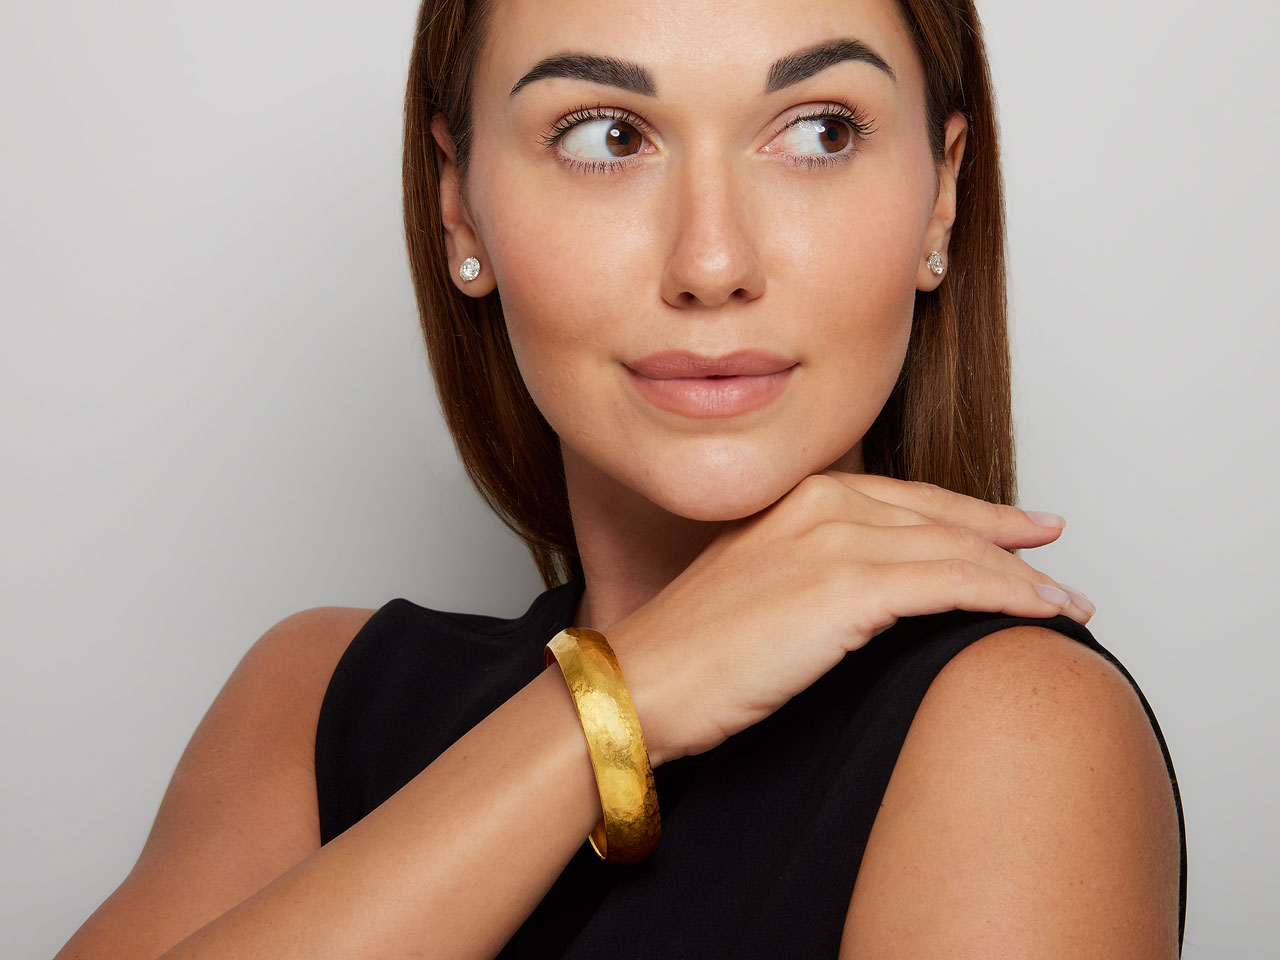 Wide Bangle Bracelet in 24K Gold, by Yossi Harari